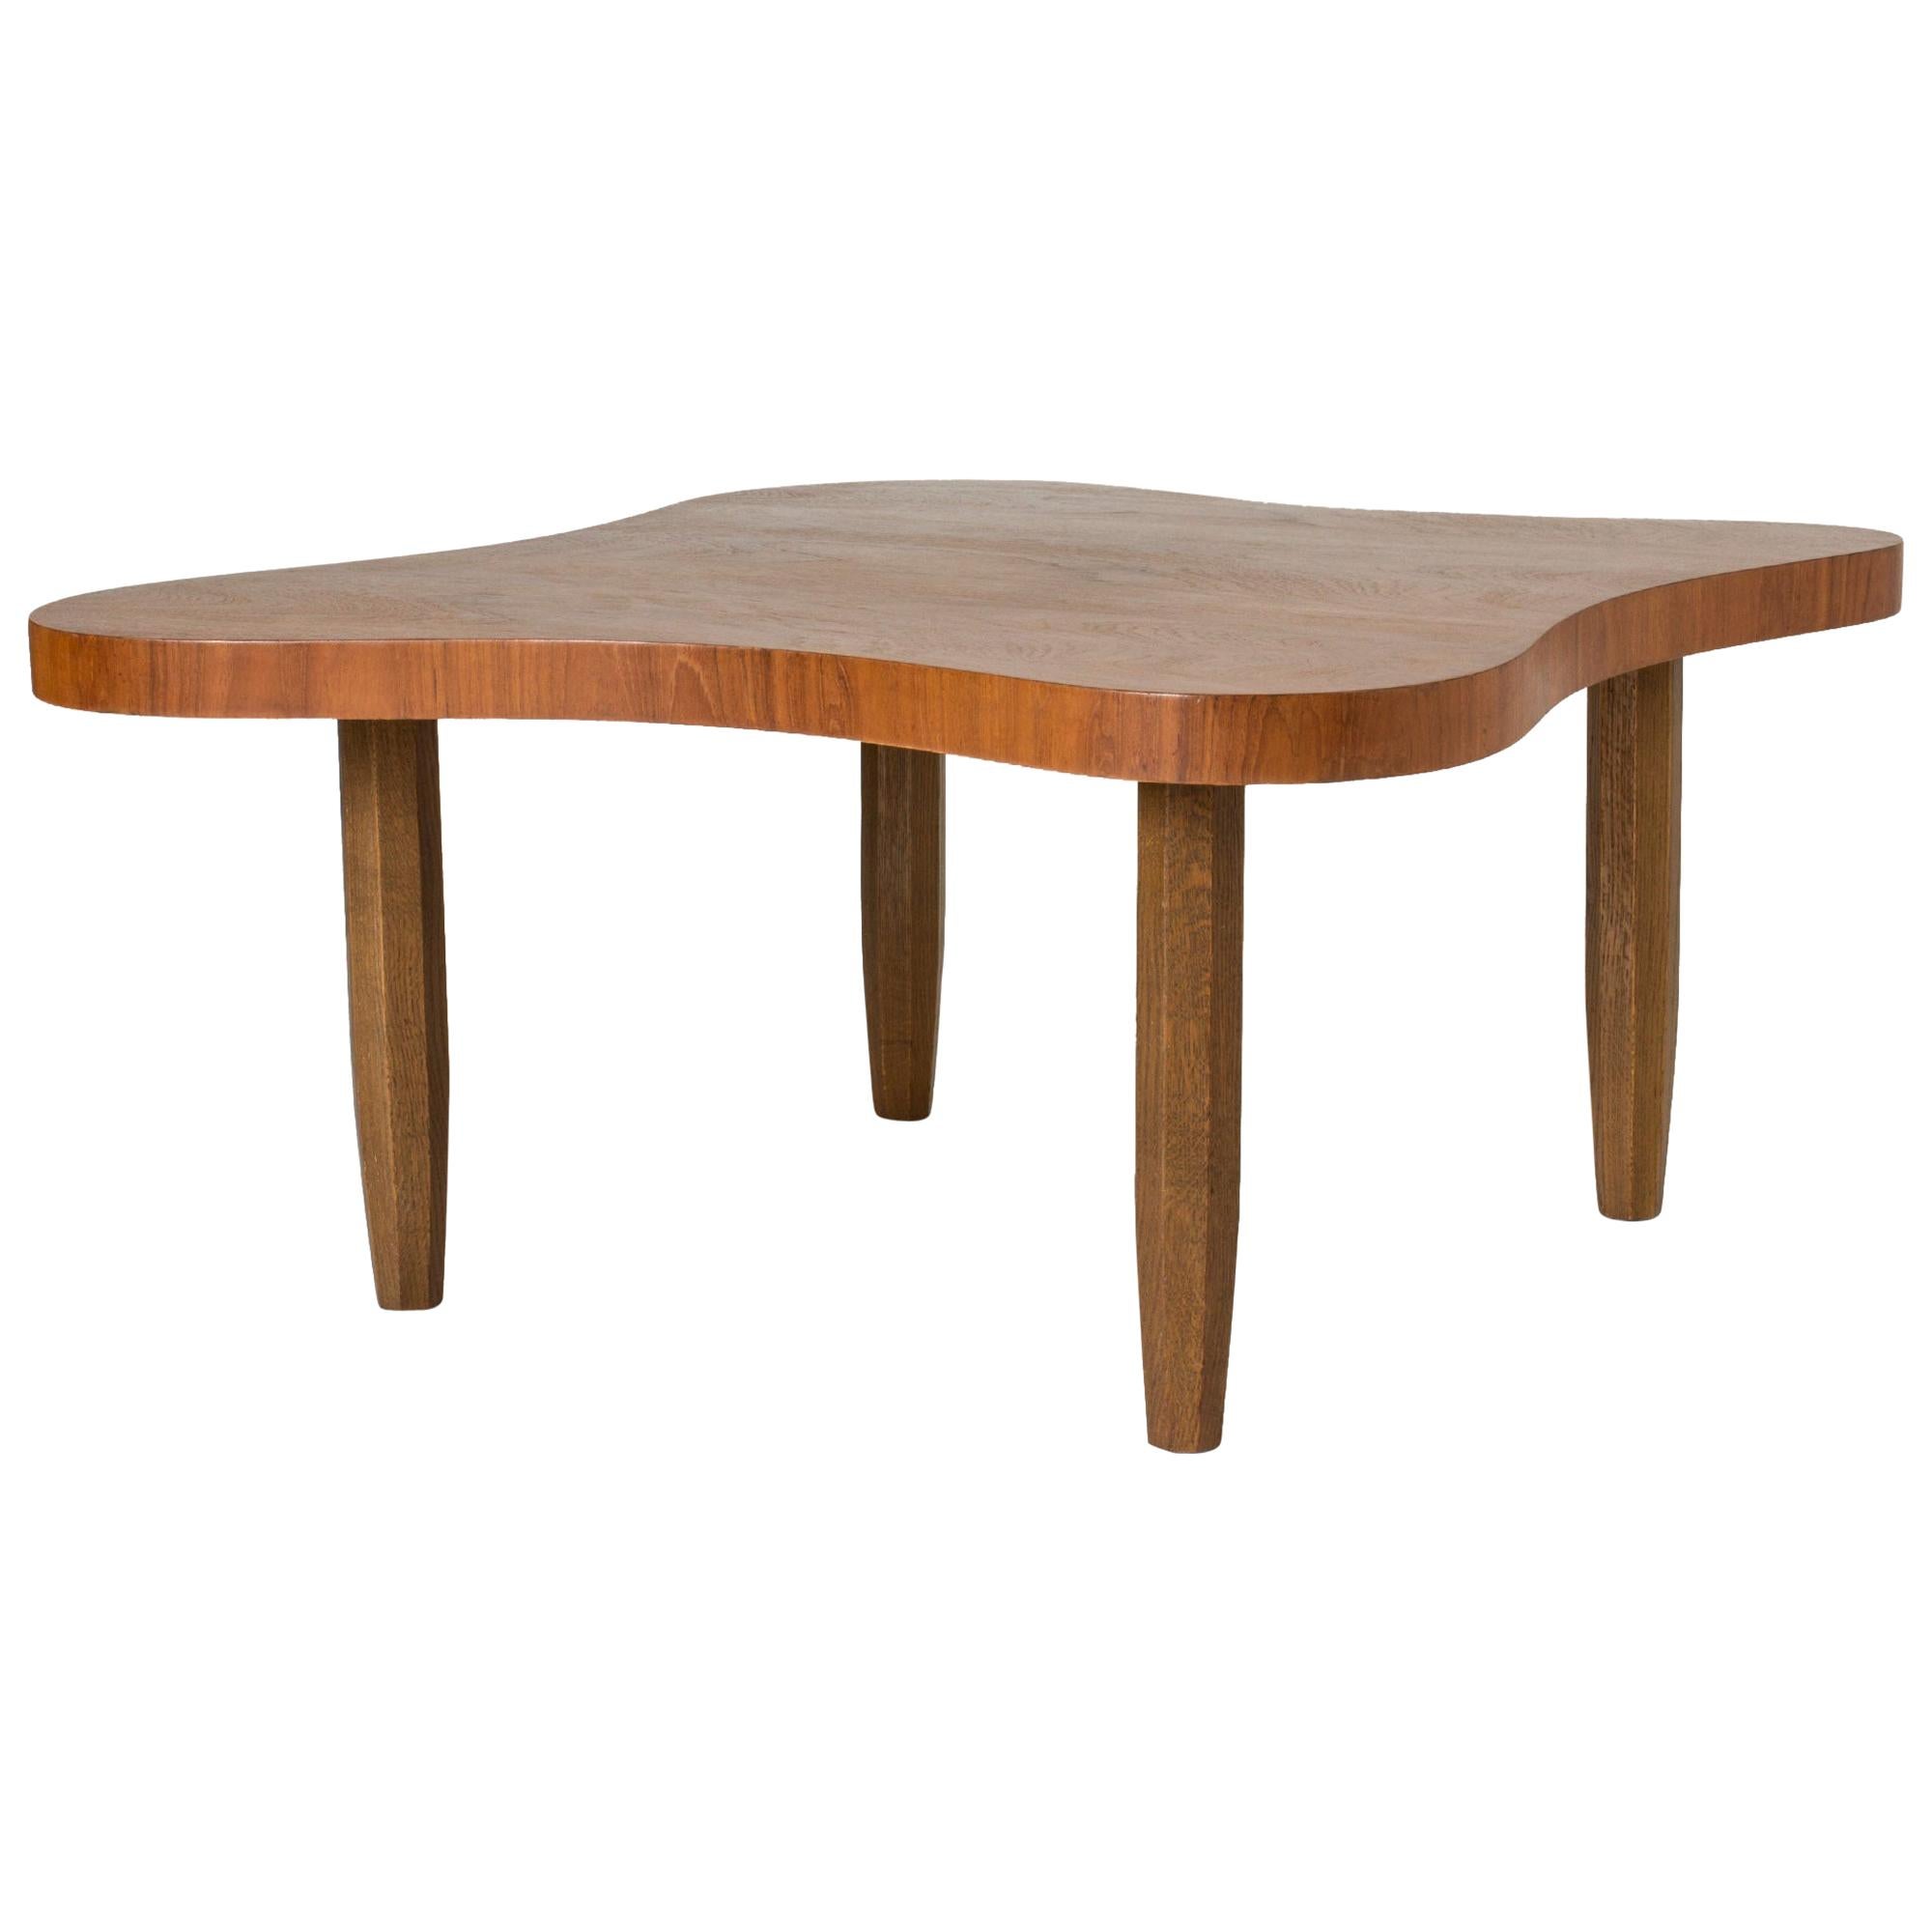 Swedish Midcentury Coffee Table by Sten Blomberg for Meeth, Sweden, 1942